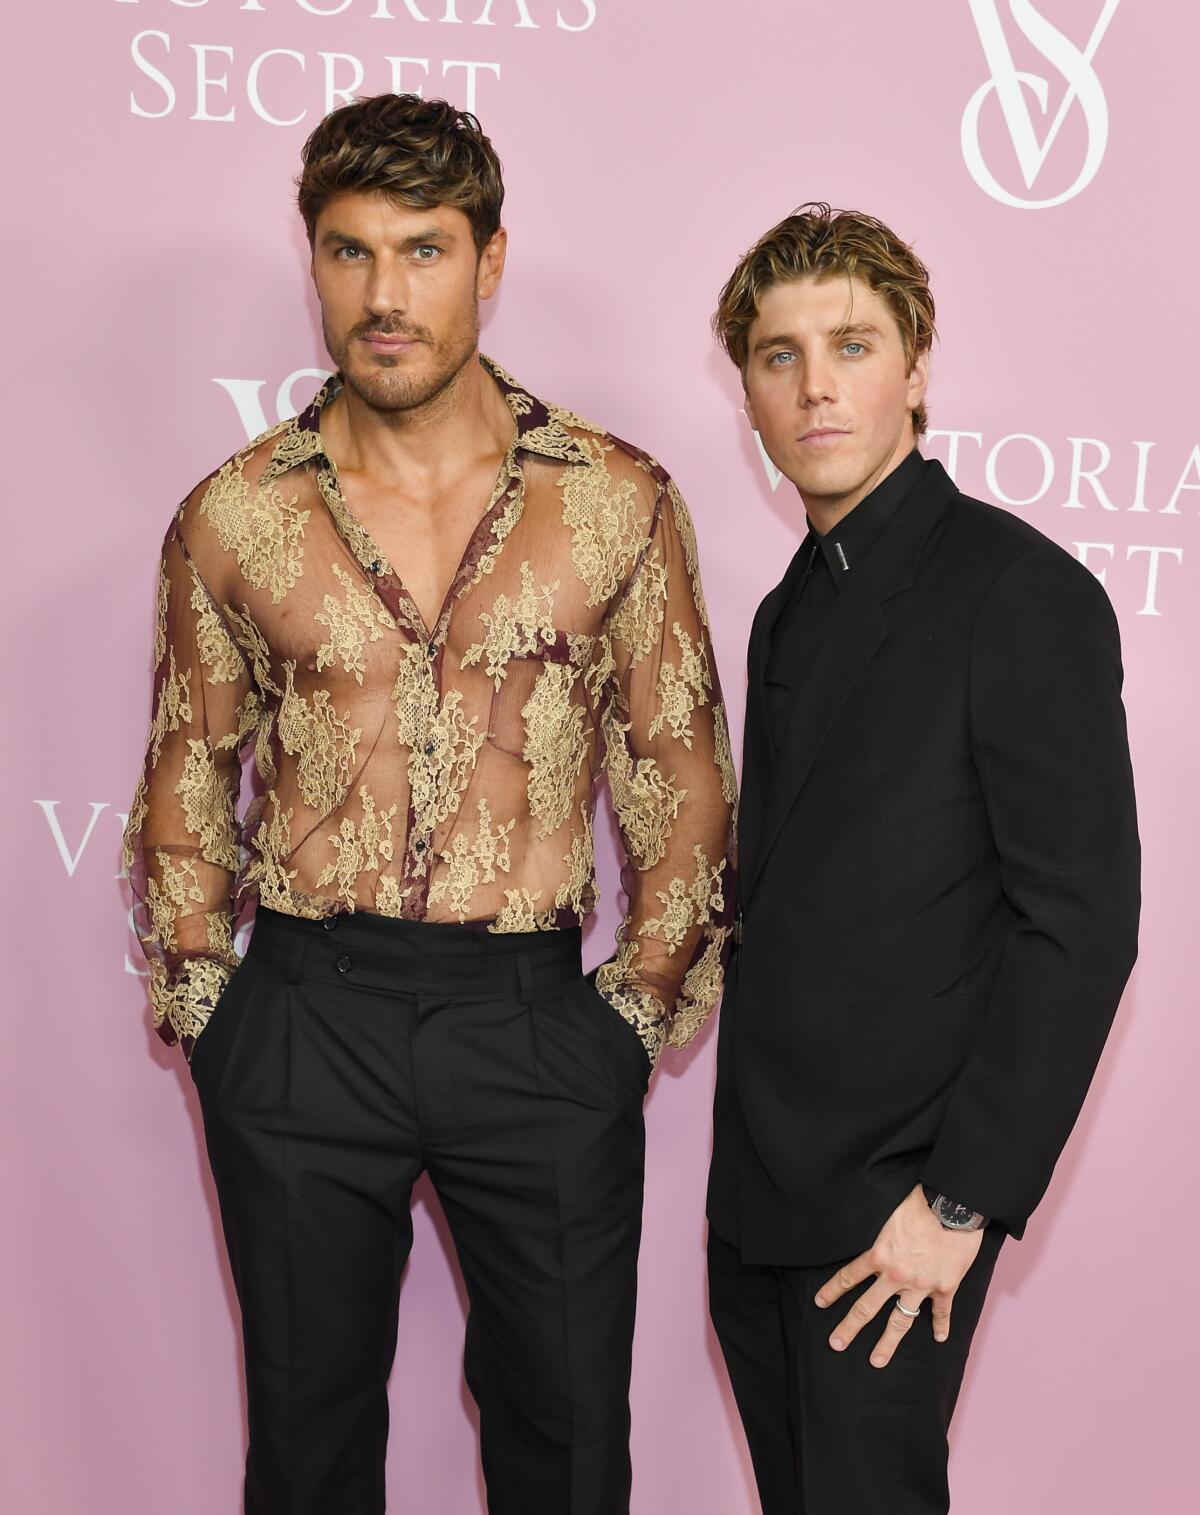 Chris Appleton is wearing a sheer gold-and-black top and posing alongside Lukas Gage in a black shirt and pants